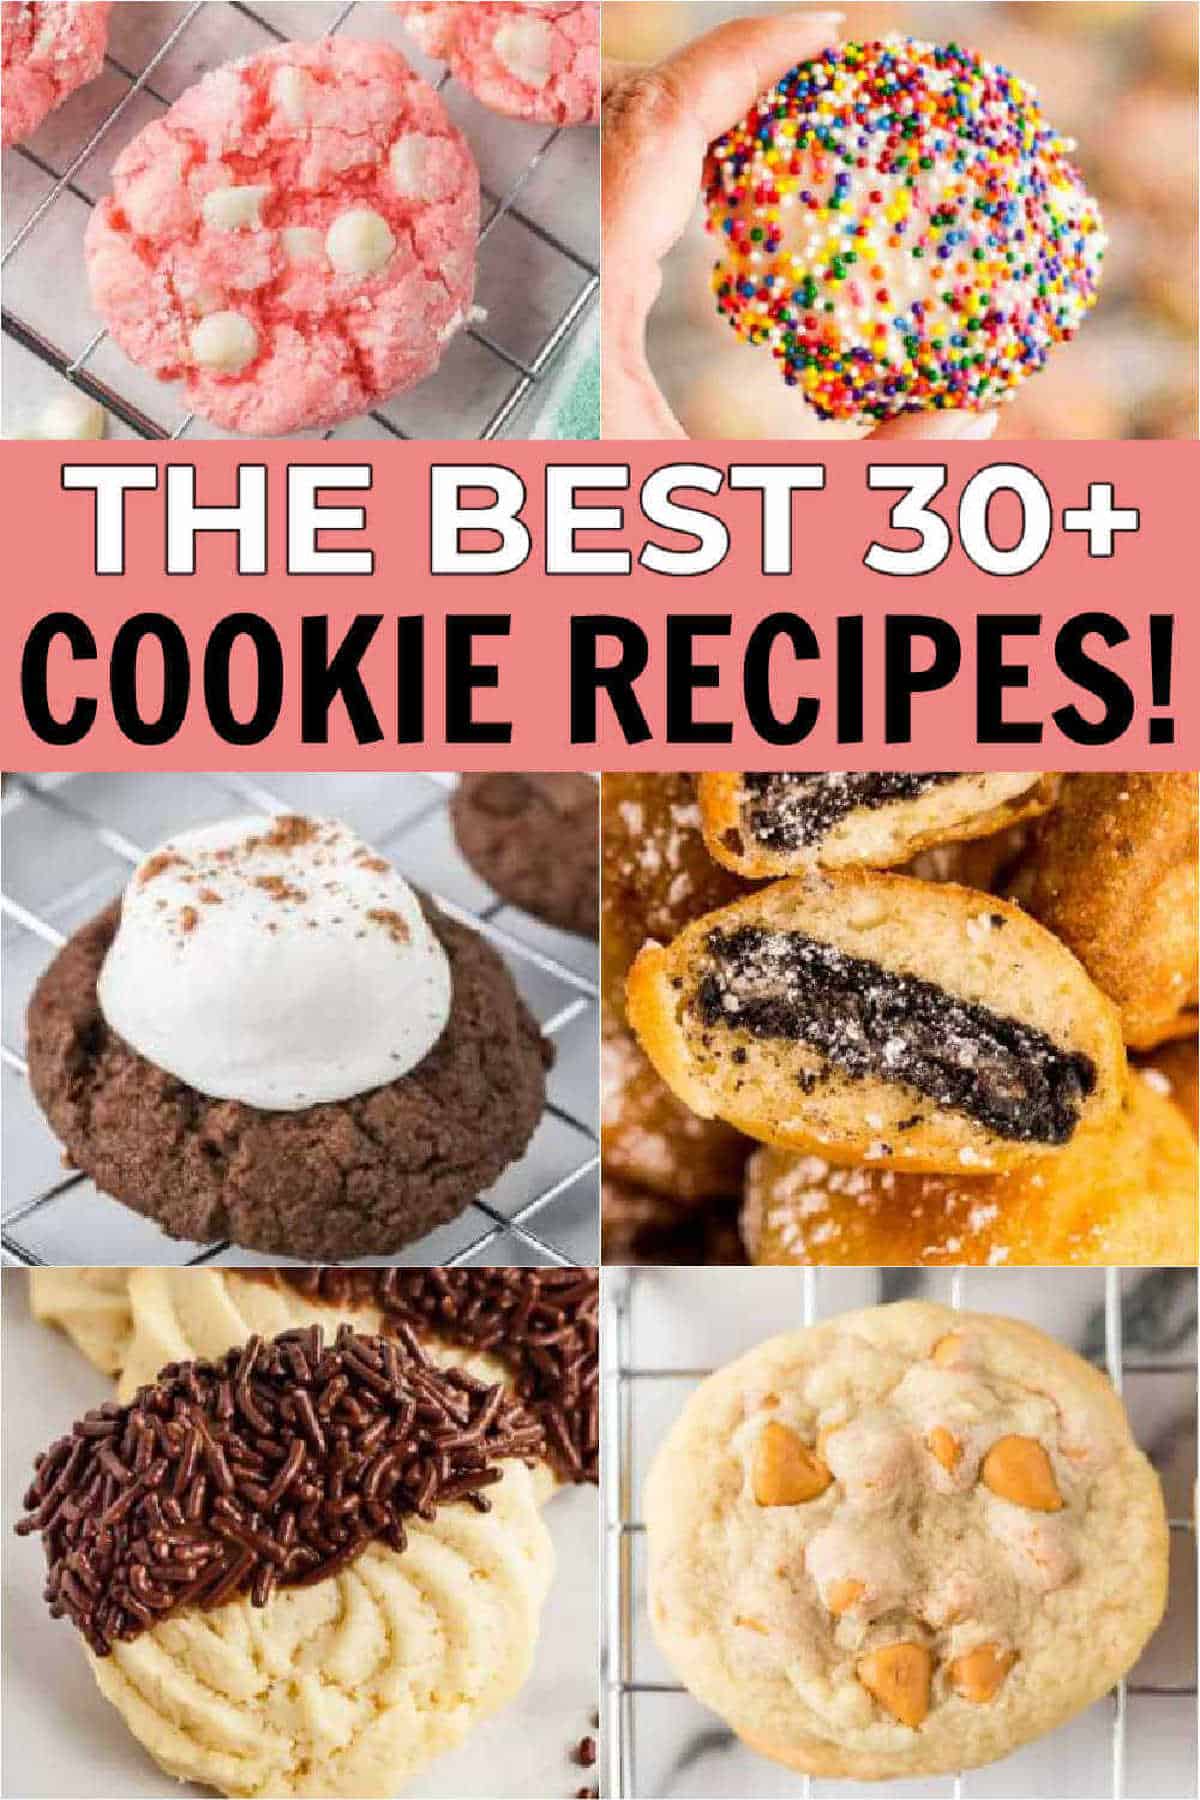 Check out all of our favorite cookie recipes.  Check out a variety of cookies including chocolate, strawberry, chocolate chips and peanut butter.  These cookie recipes are perfect for the holidays and for Christmas.  Everyone will love these cookie recipes! #eatingonadime #cookierecipes #dessertrecipes 
